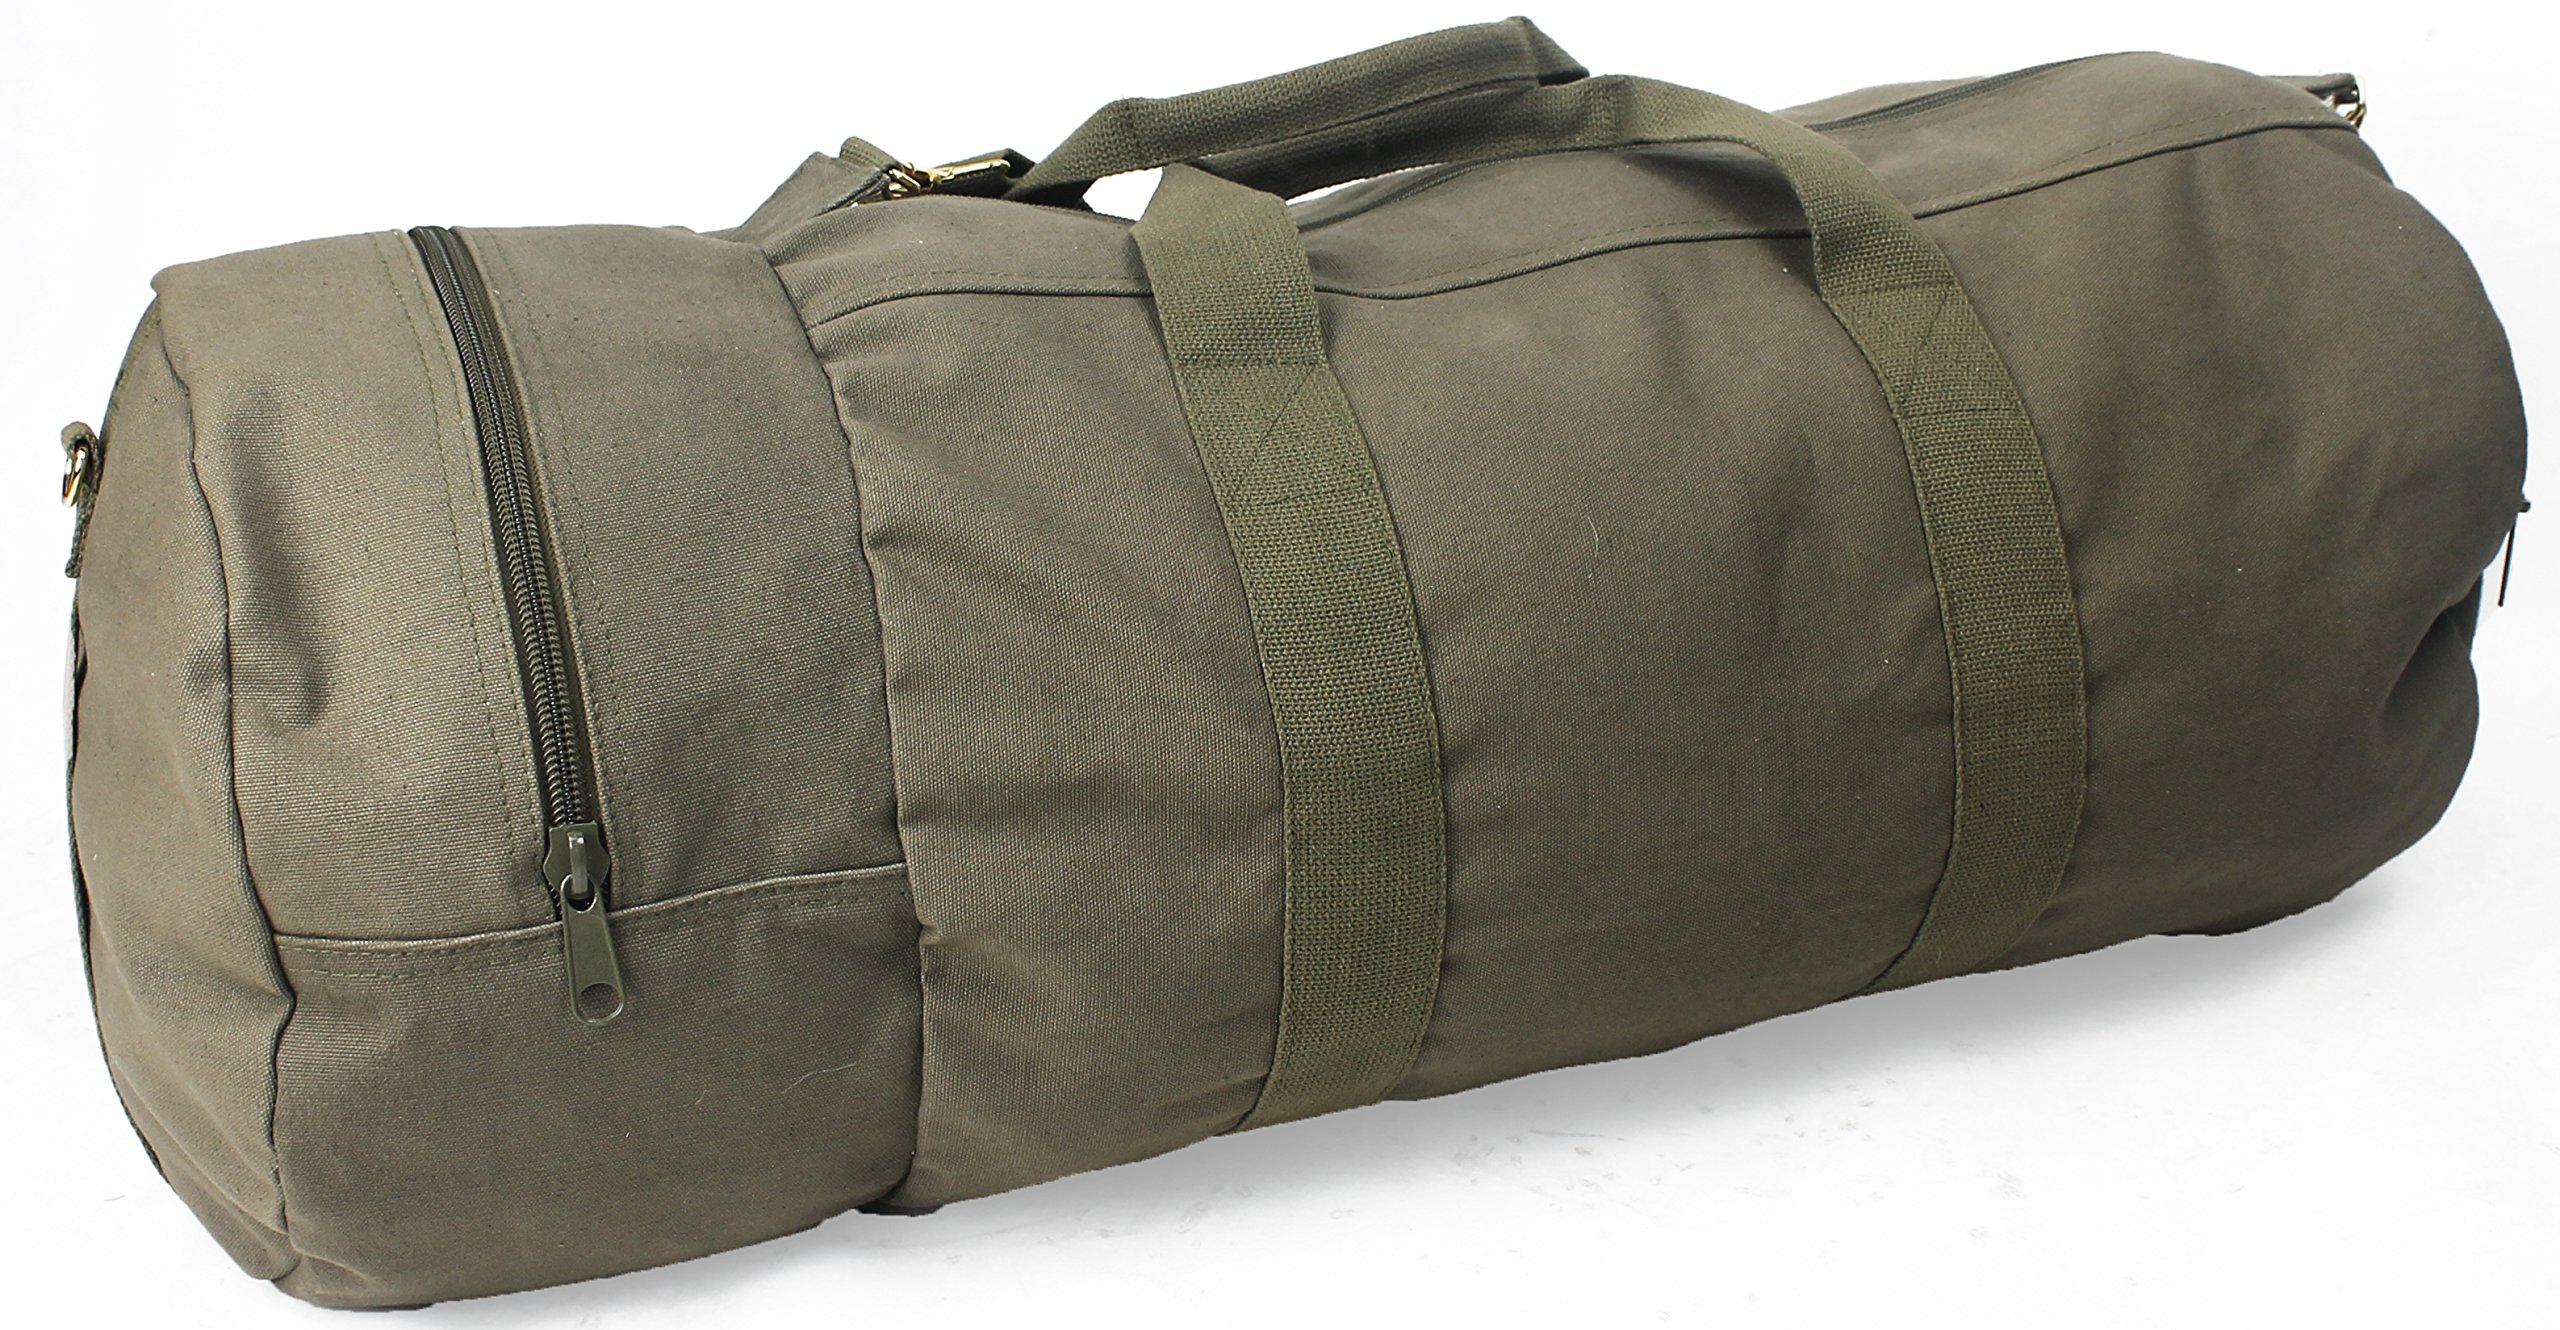 Mua ARMYU Cotton Canvas Large Shoulder Duffle Bag, Olive Drab Military